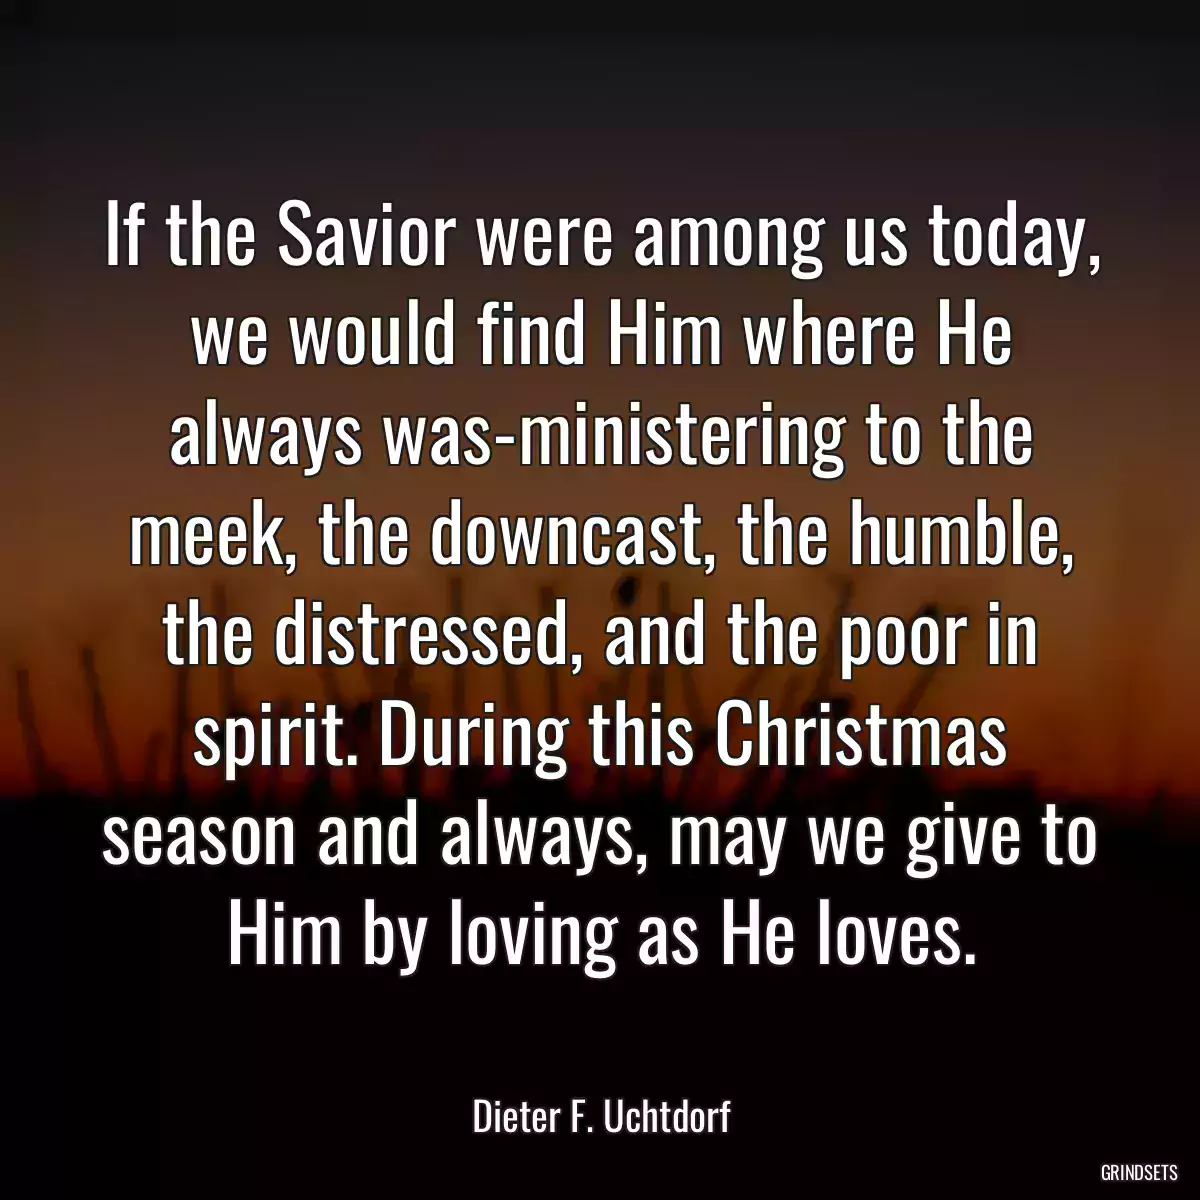 If the Savior were among us today, we would find Him where He always was-ministering to the meek, the downcast, the humble, the distressed, and the poor in spirit. During this Christmas season and always, may we give to Him by loving as He loves.